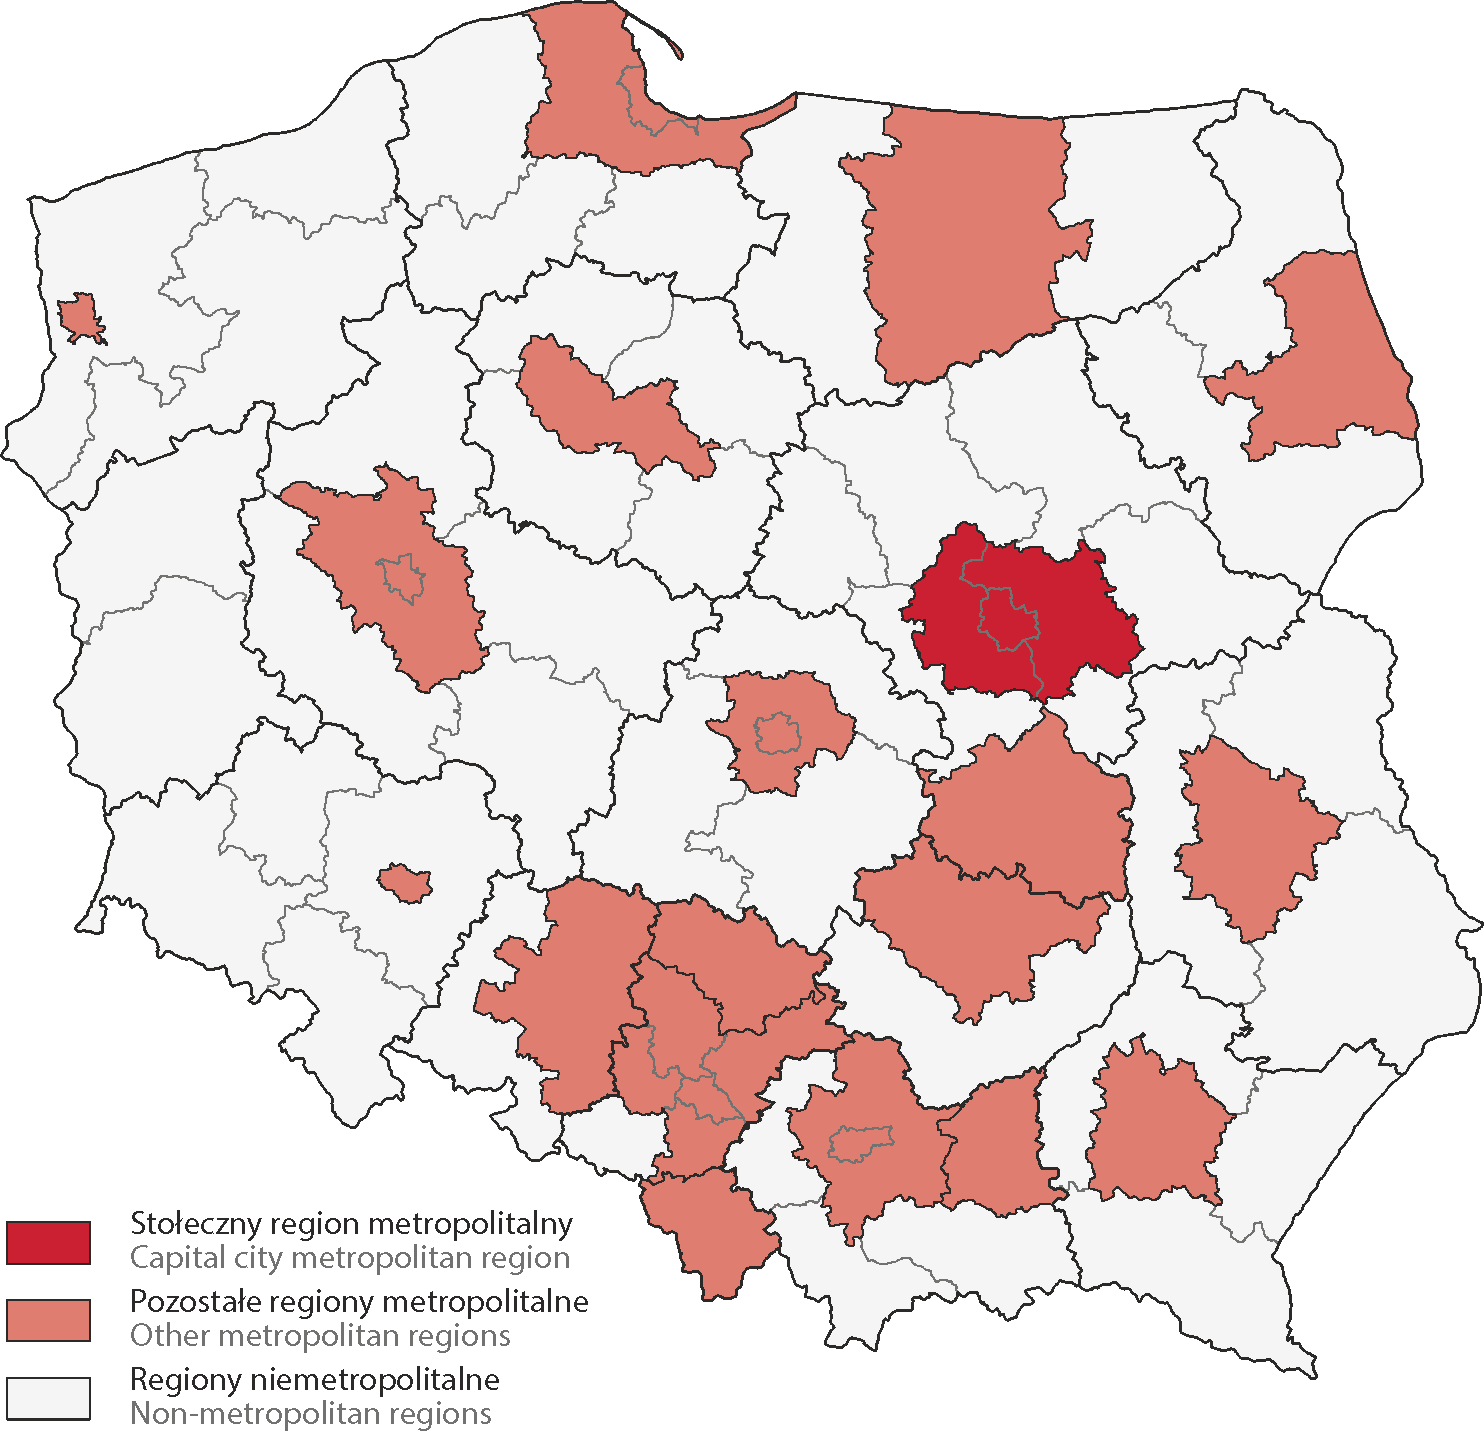 The metropolitan typology in Poland according to the NUTS 2016 revision